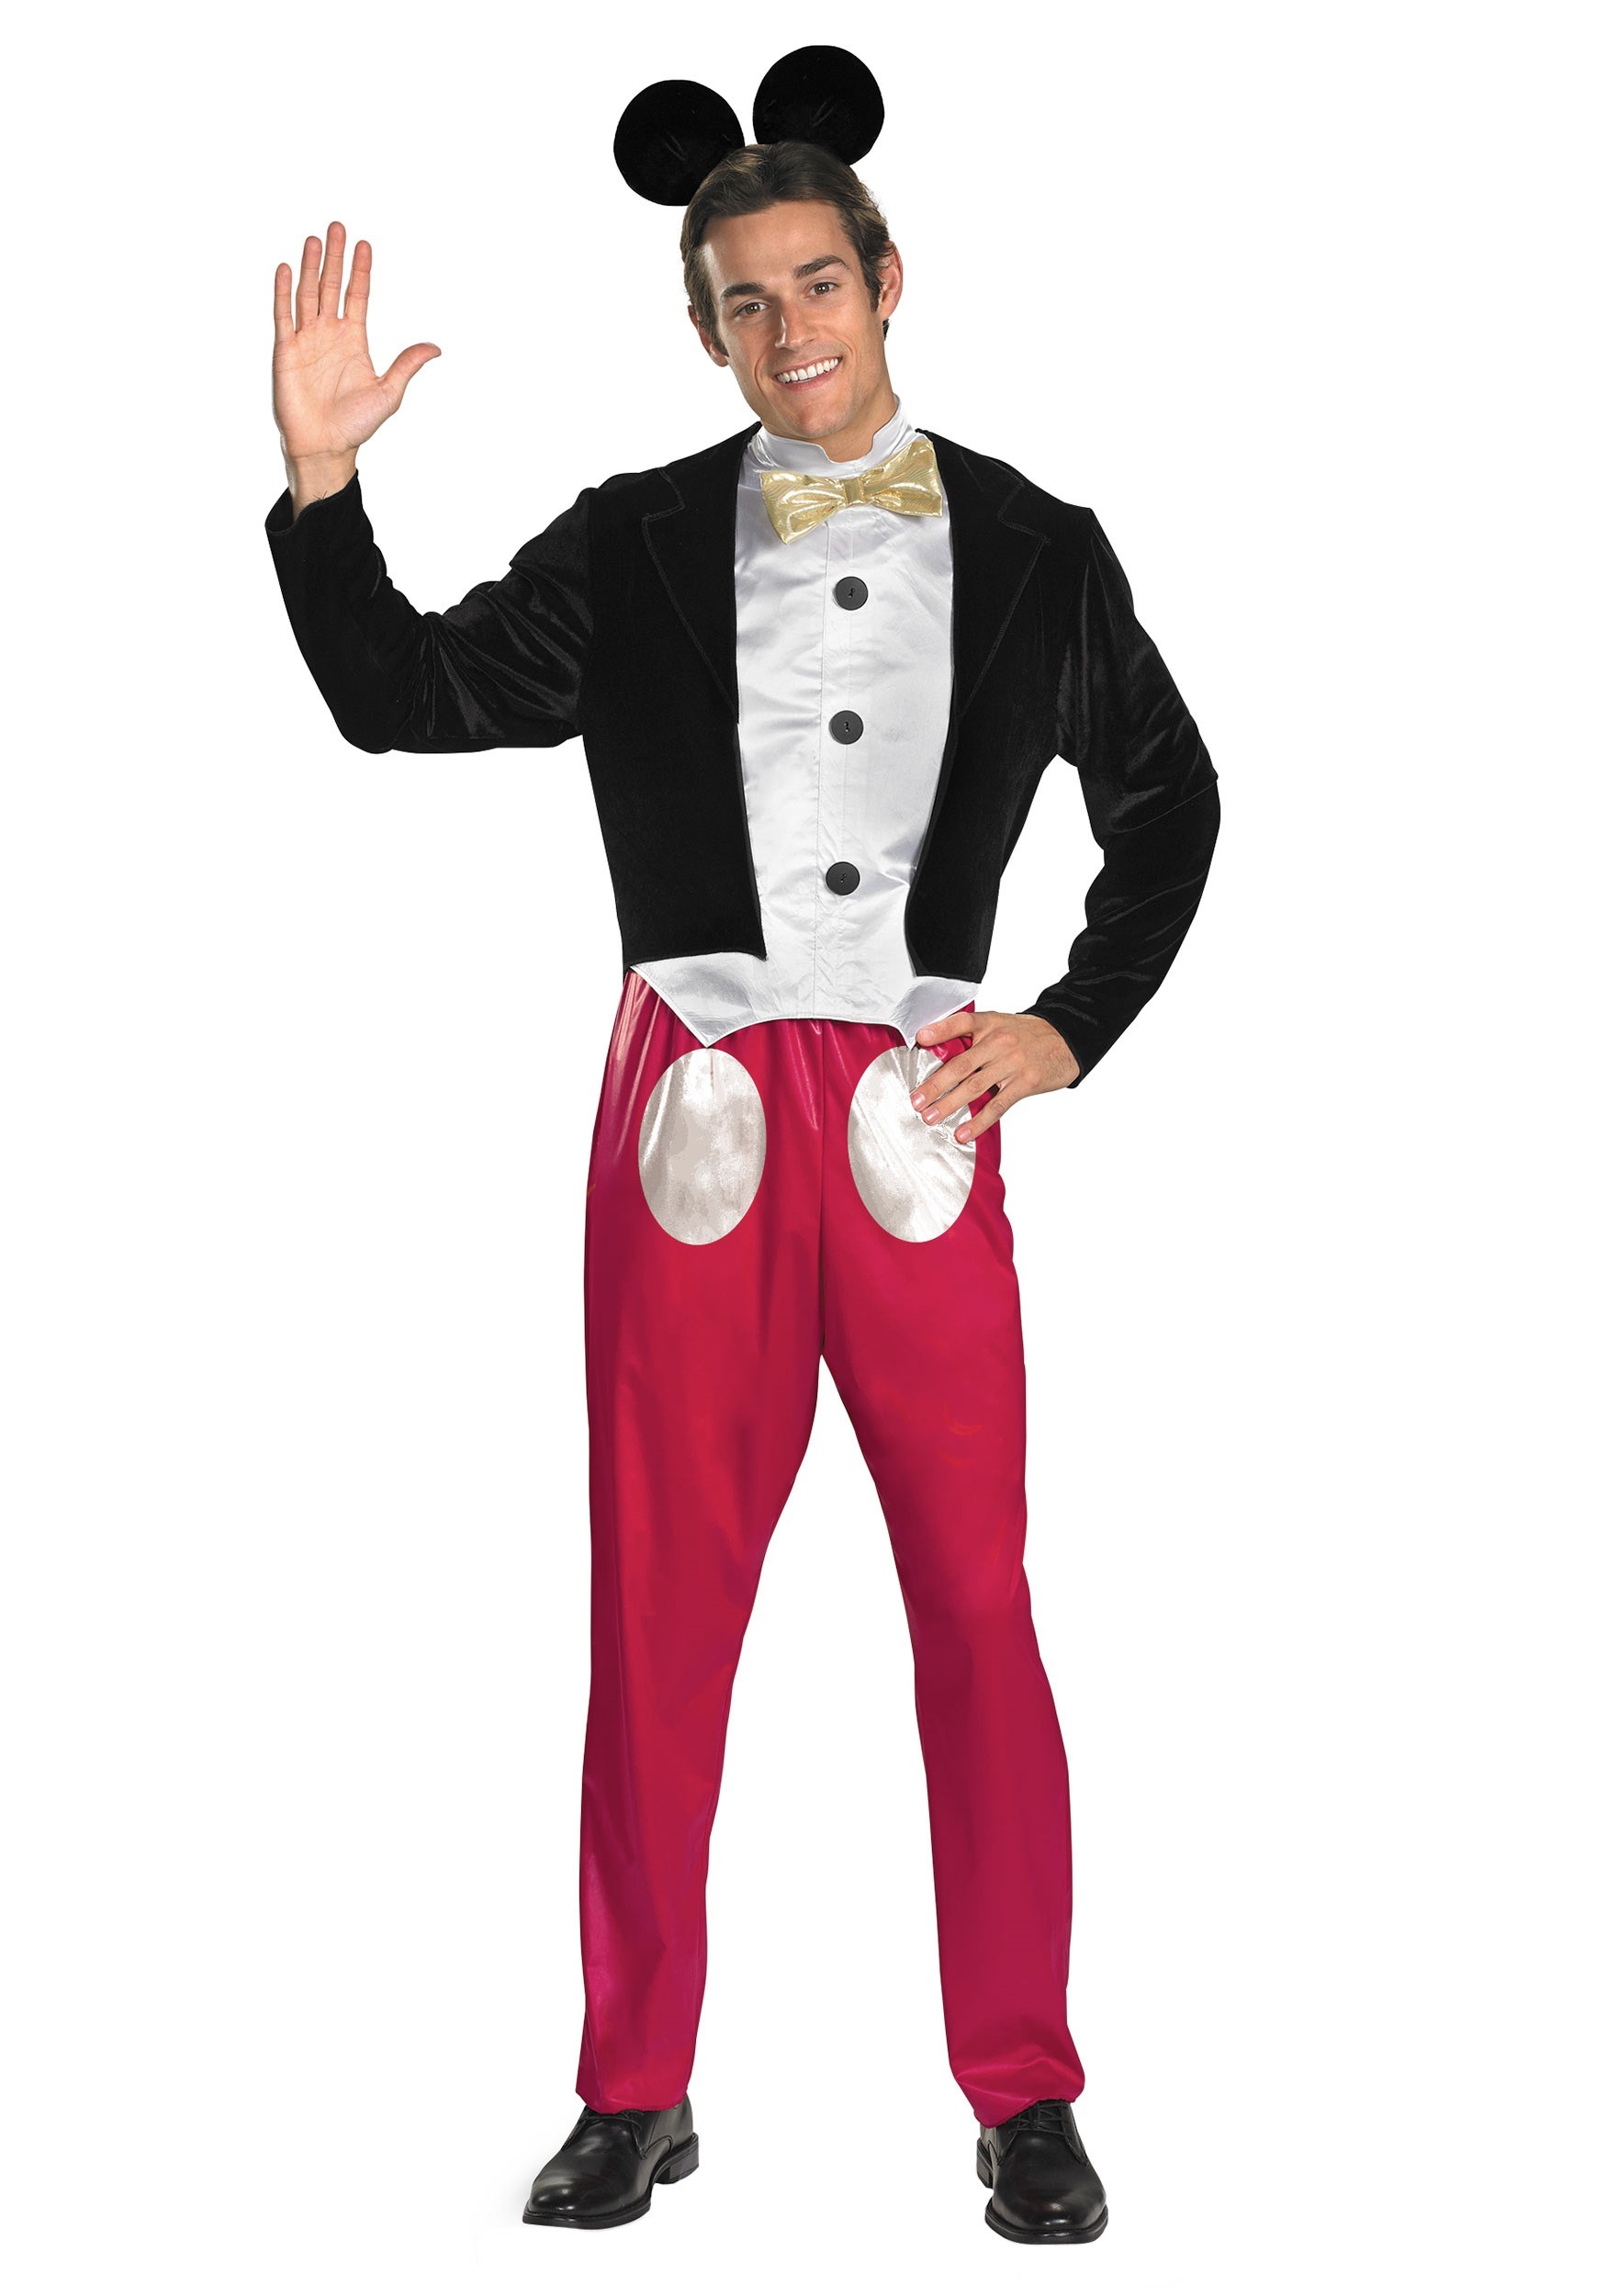 https://images.fun.com/products/14663/1-1/mickey-mouse-adult-costume.jpg